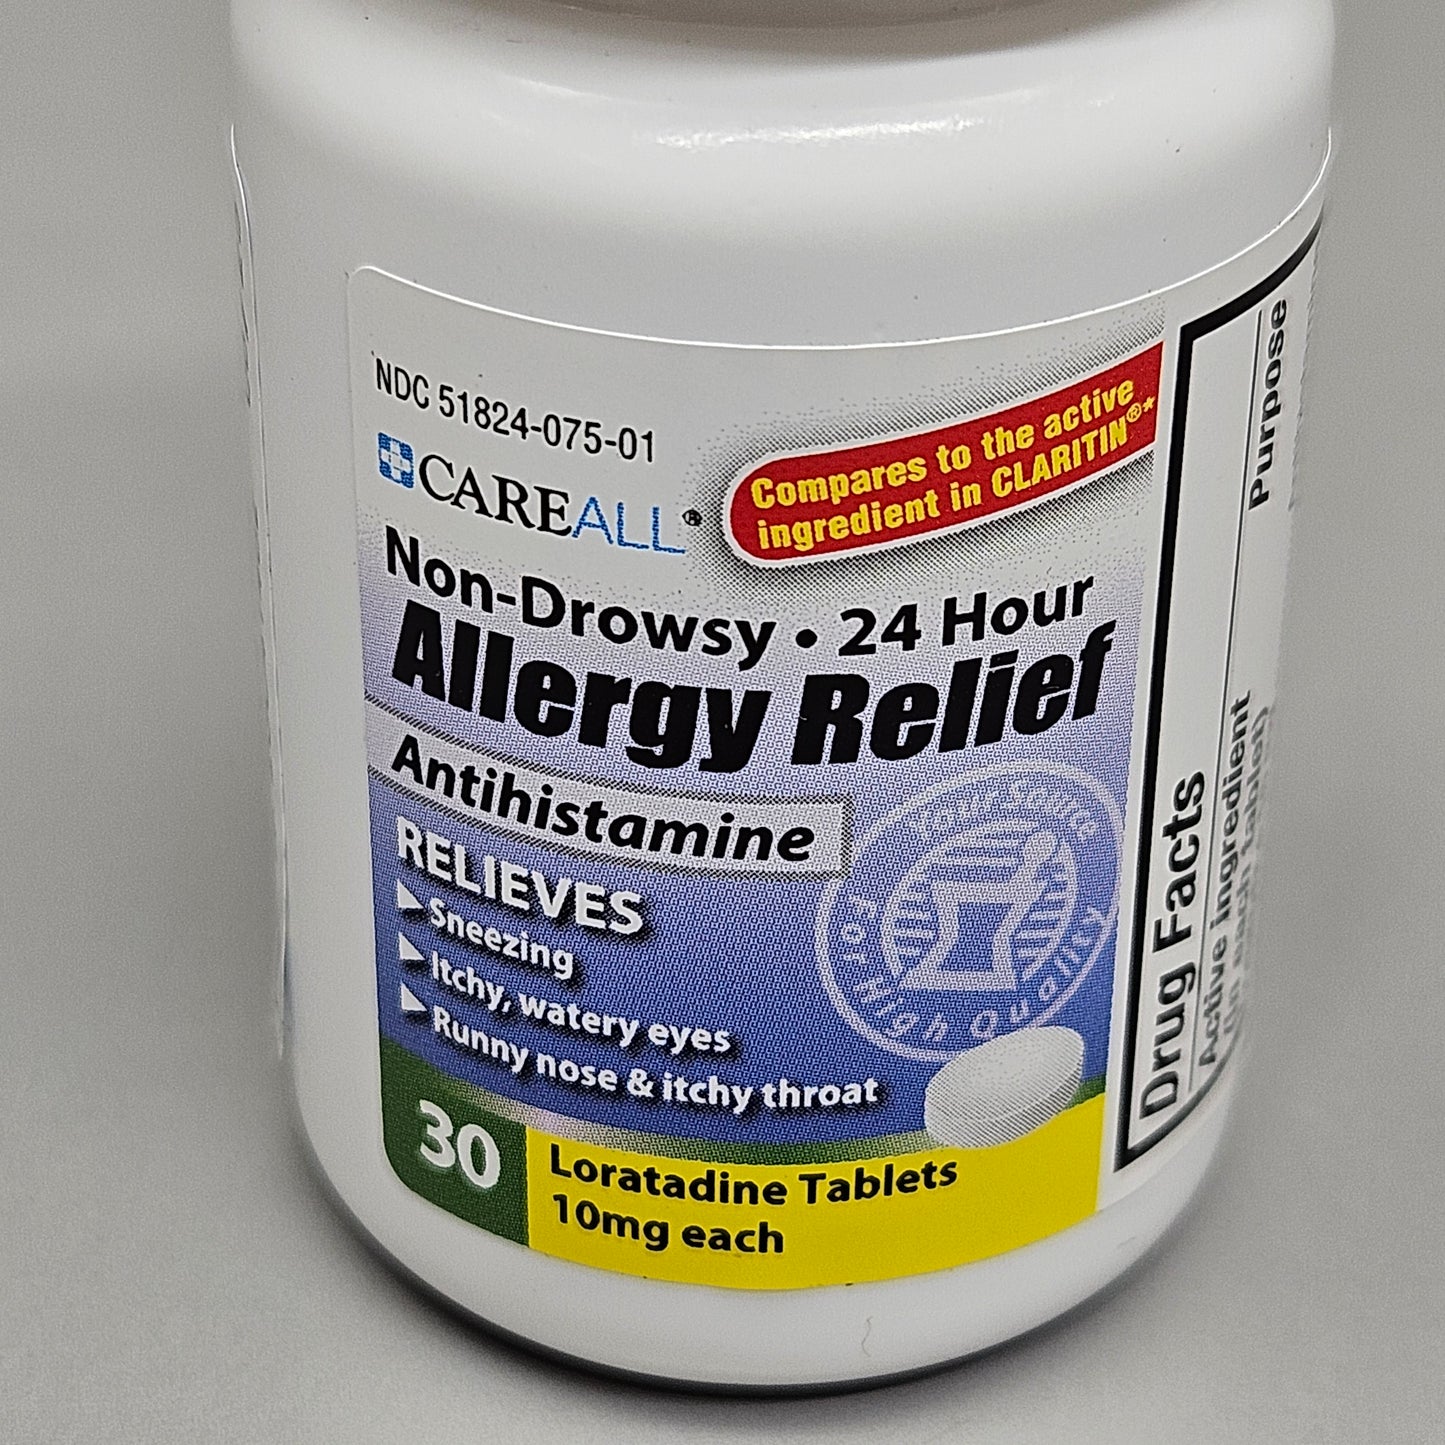 CAREALL (4 PACK) Non-Drowsy 24 Hour Allergy Relief 30 Loratadine Tablets BB 08/25